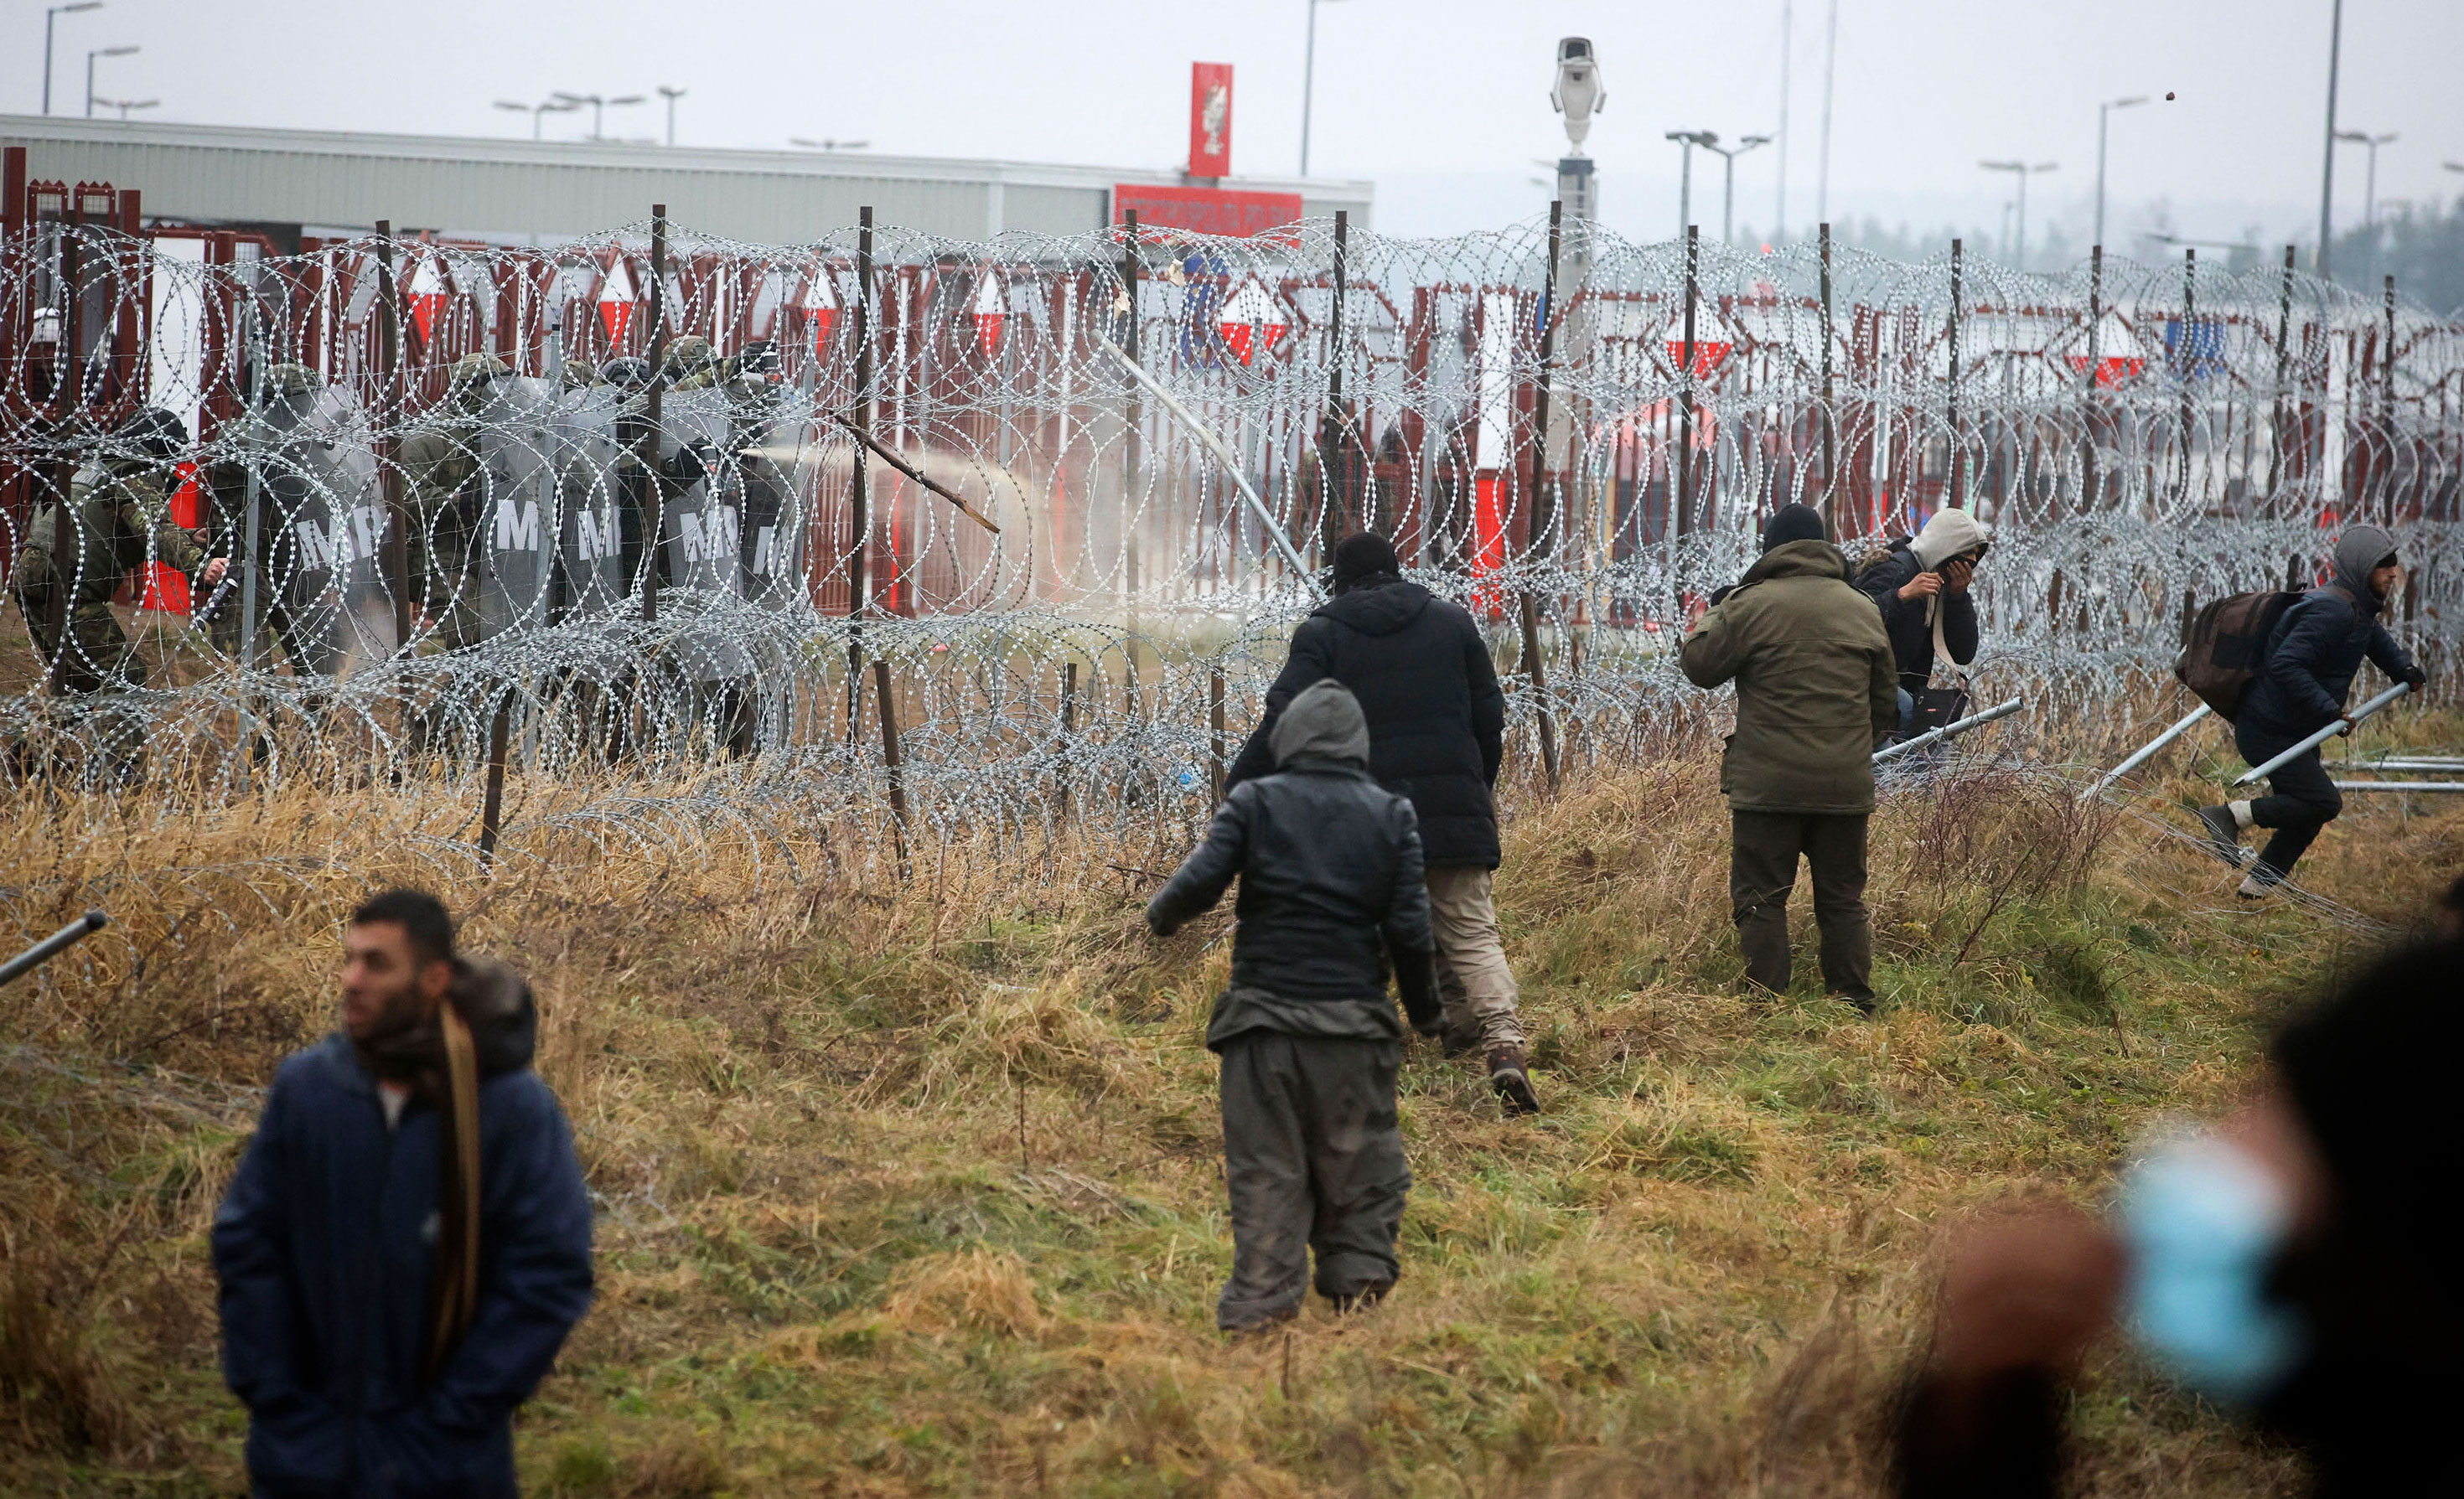 Polish servicemen, top left, spray tear gas during clashes between migrants and Polish border guards at the Belarus-Poland border near Grodno, Belarus, on November 16.